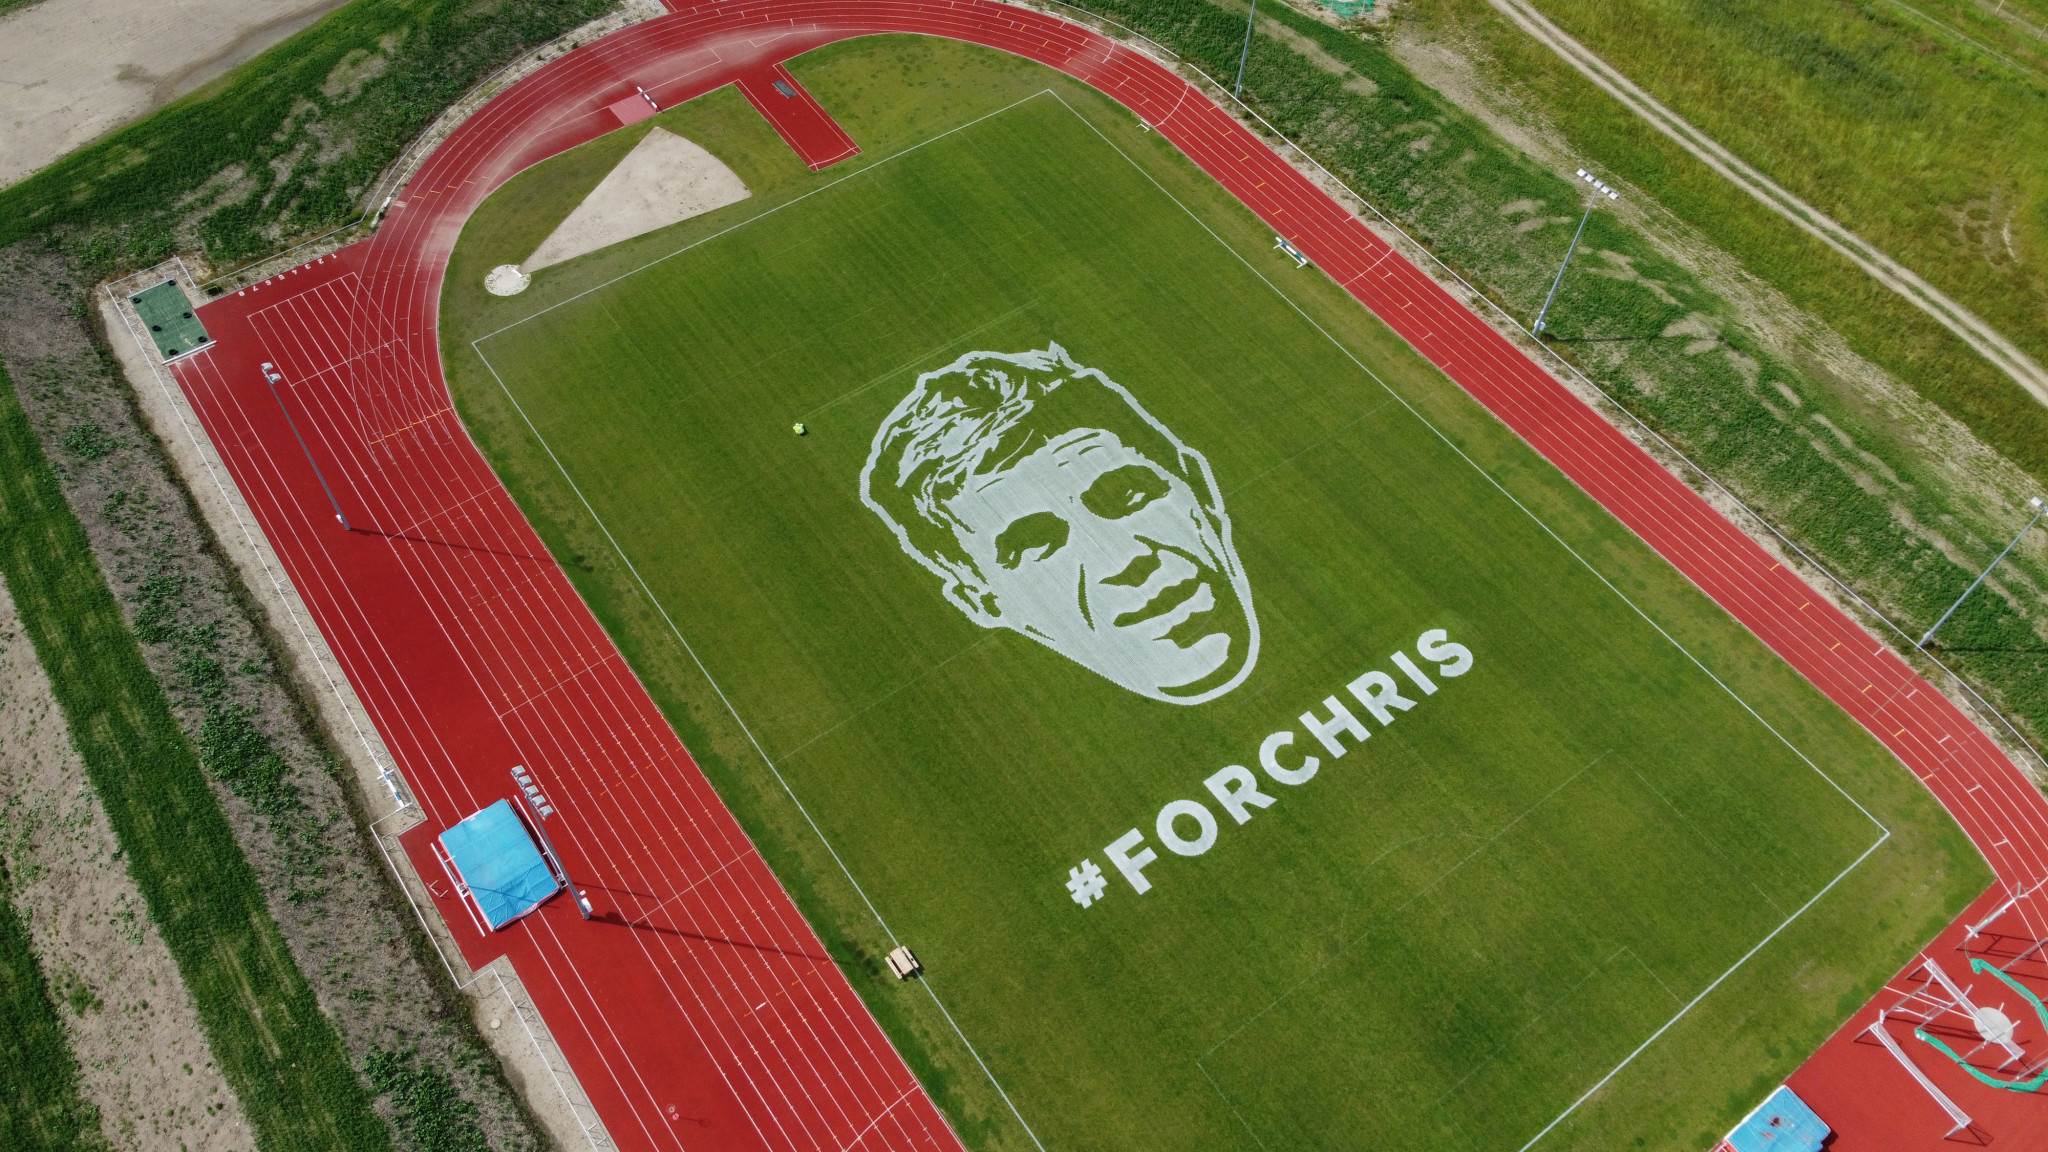 The mural of Chris Anker Sørensen is set to appear on helicopter pictures during the second stage of the Tour de France ©Turf Tank